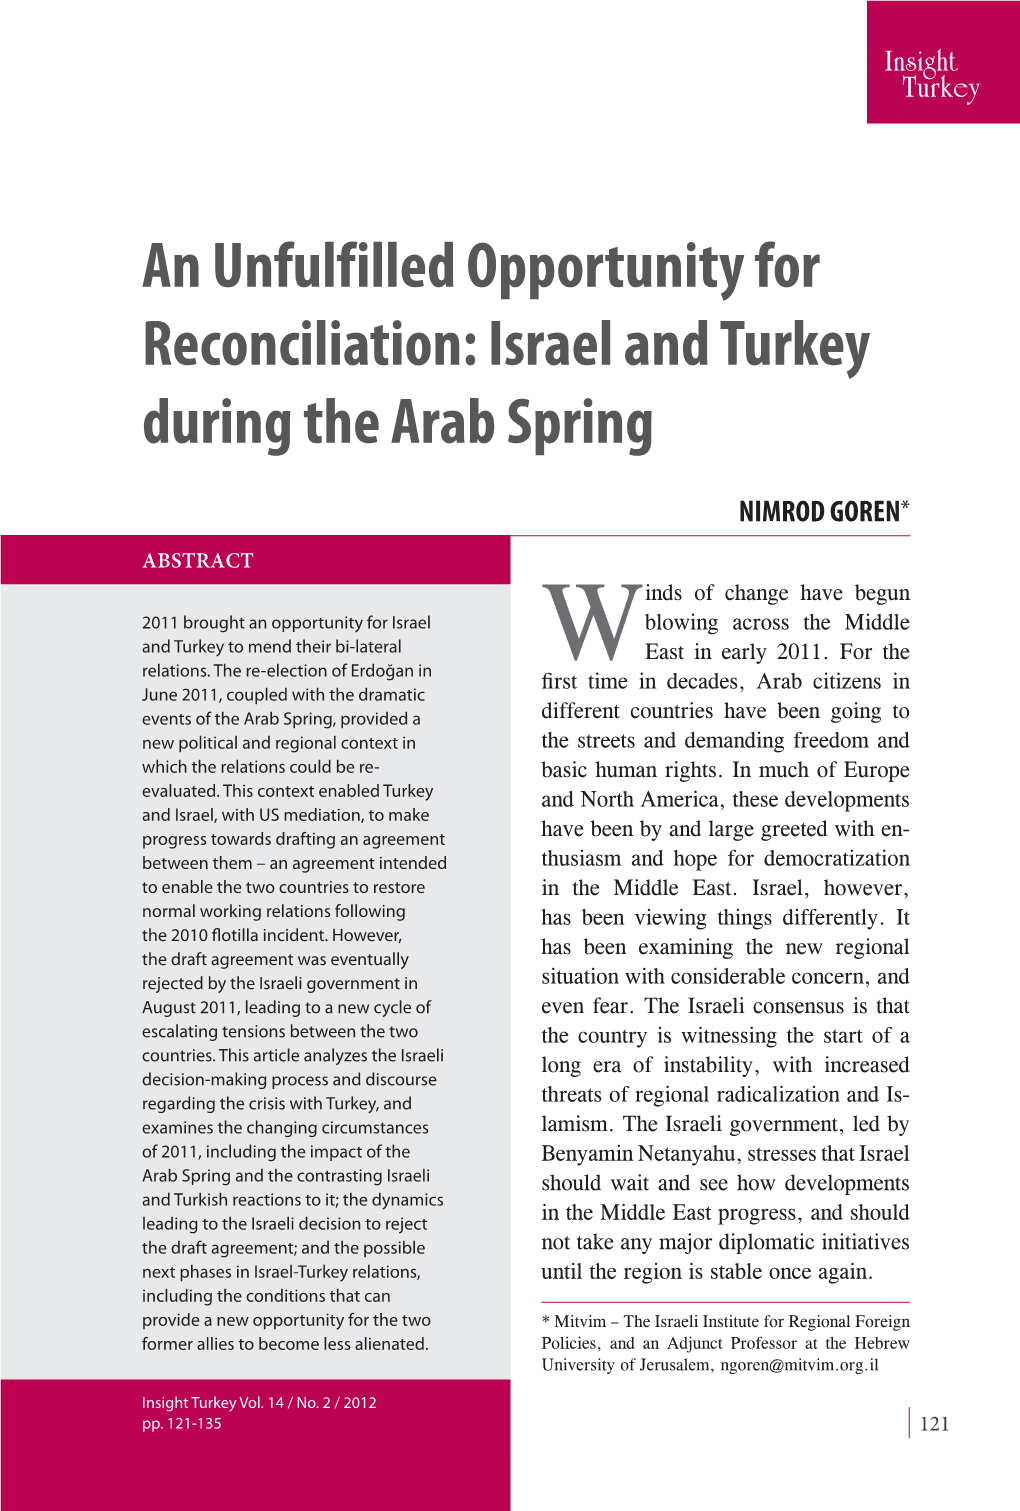 An Unfulfilled Opportunity for Reconciliation: Israel and Turkey During the Arab Spring